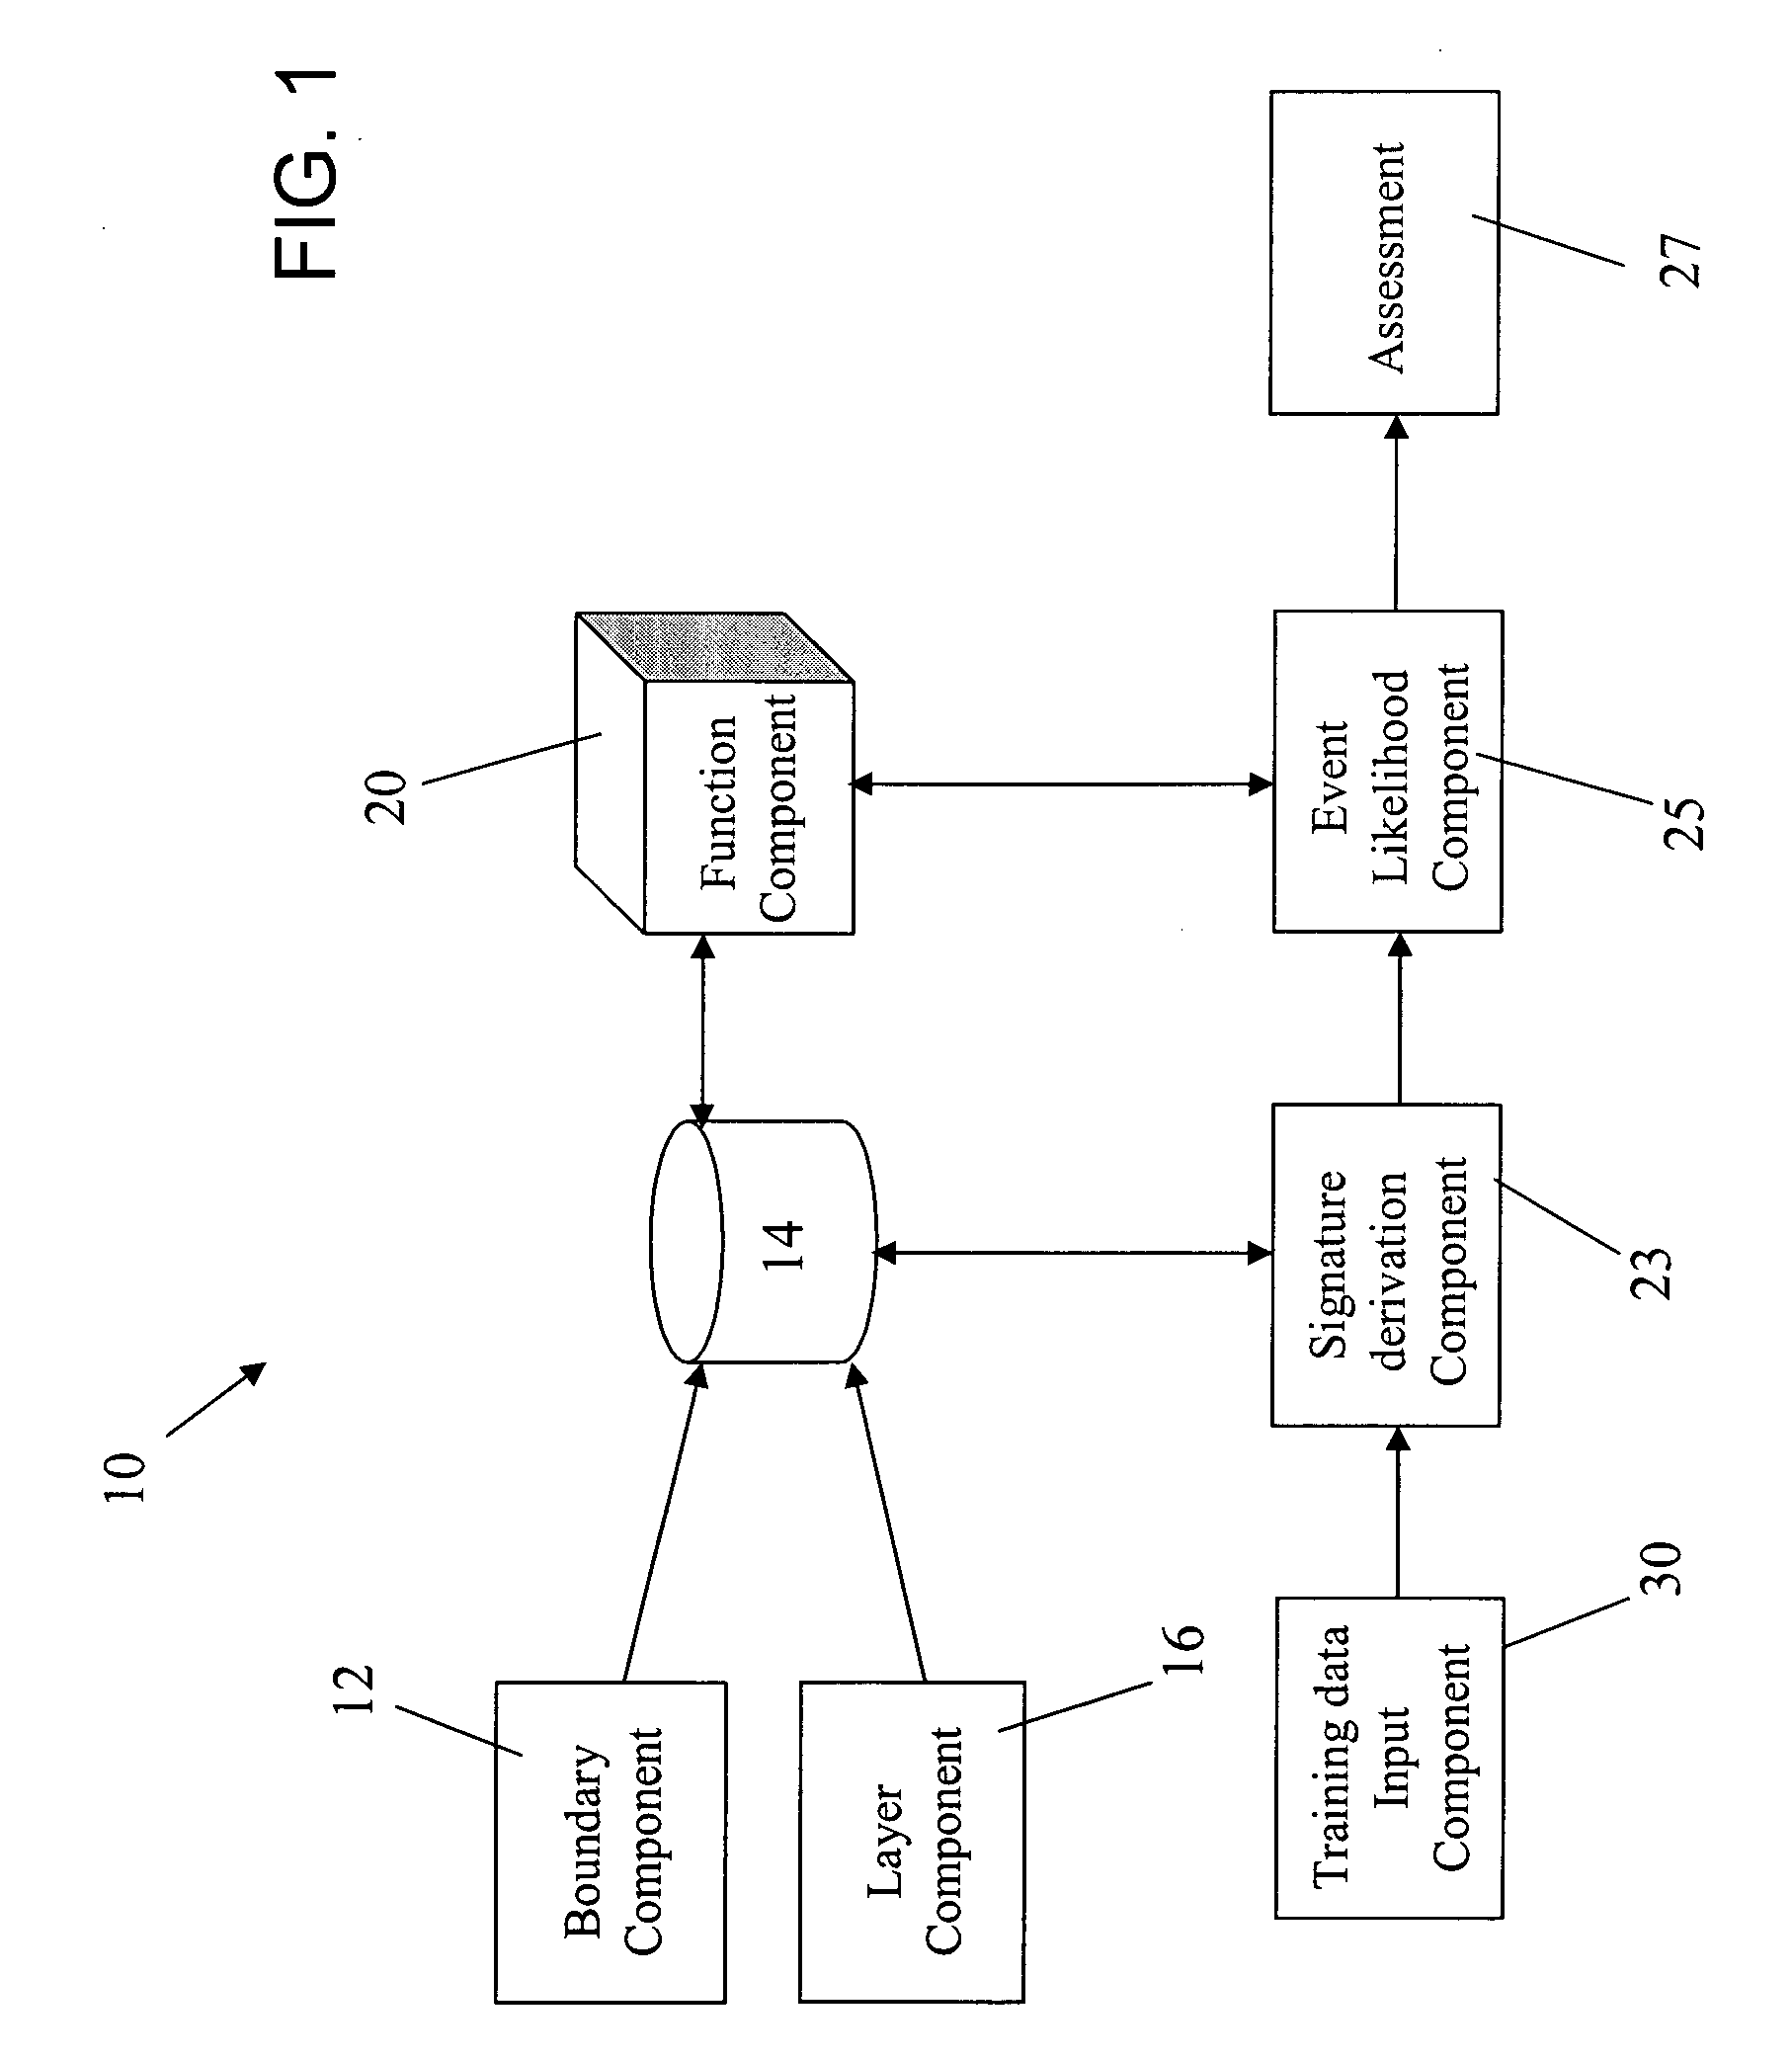 Method and system for spatial behavior modification based on geospatial modeling